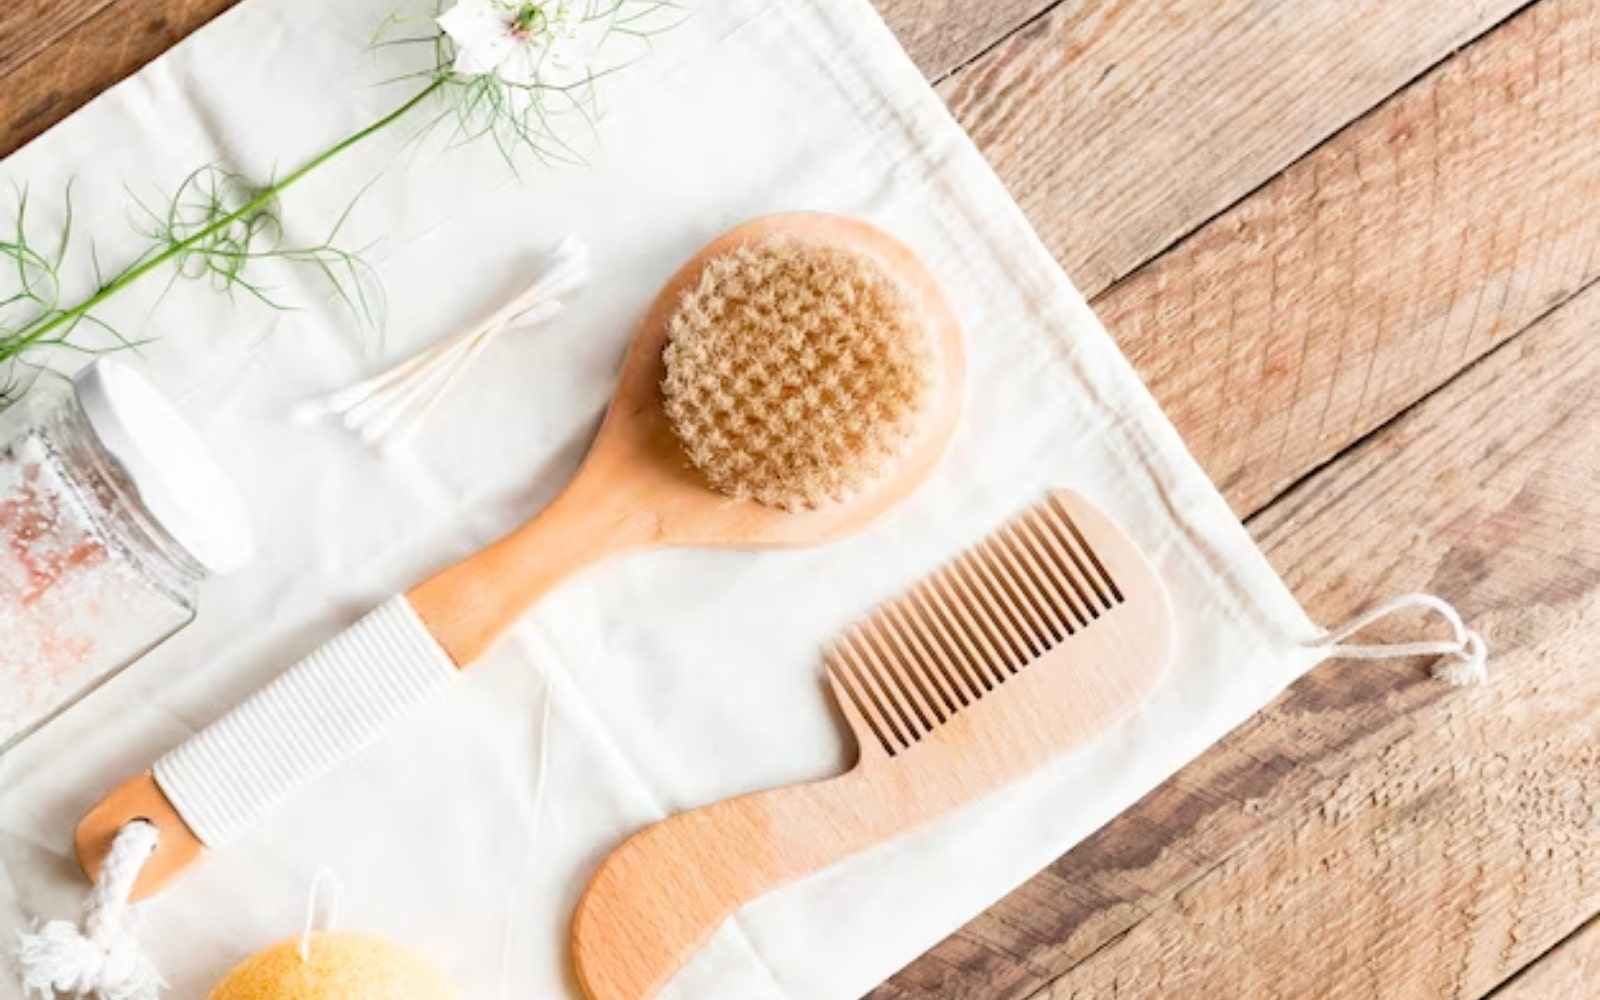 Bamboo or wooden hairbrushes and combs